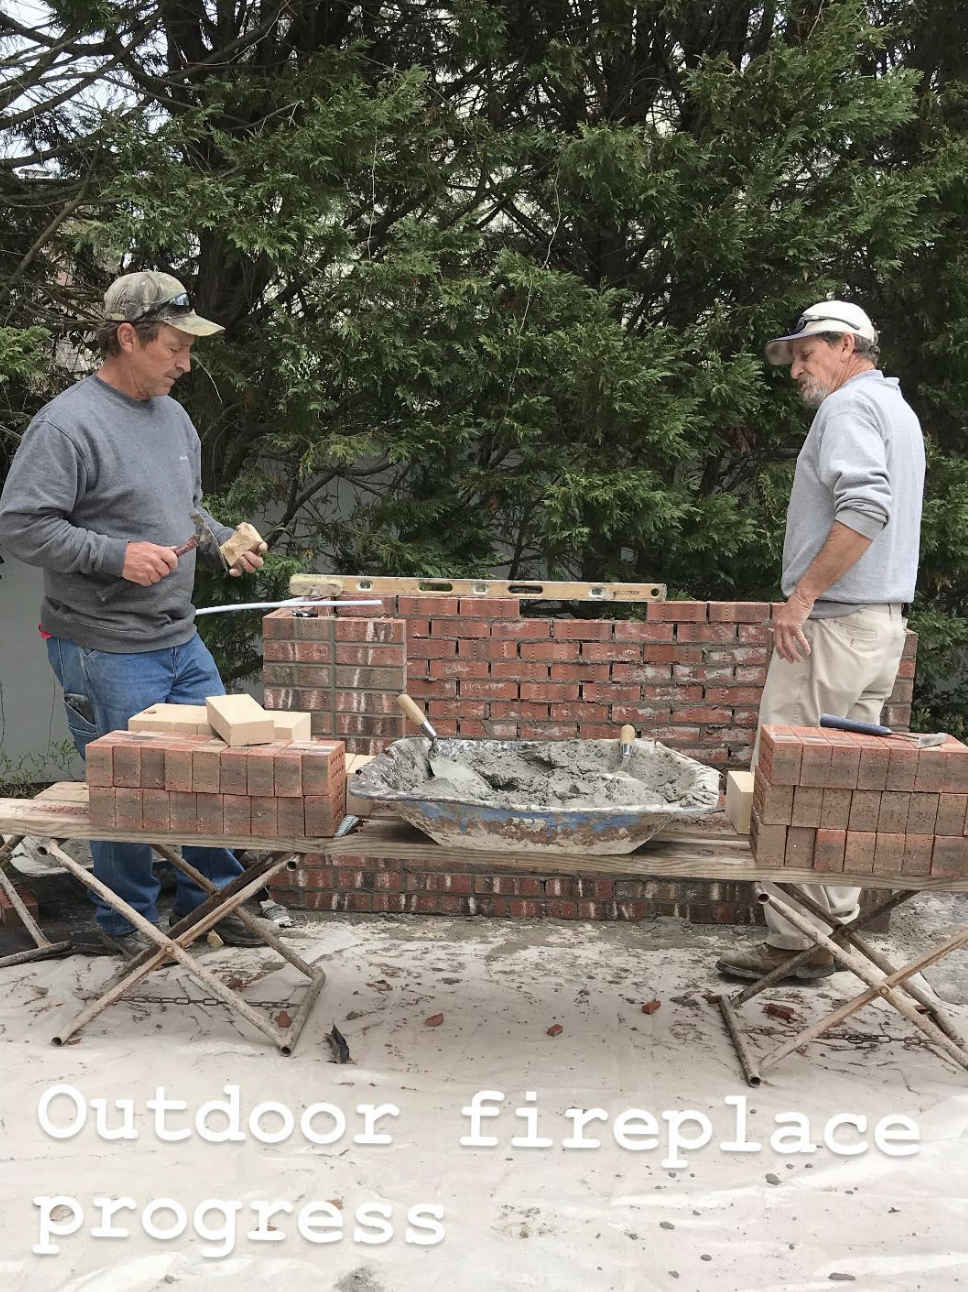 Outdoor fireplace being installed on my Graylyn project in Fayetteville, NC. www.janadonohedesigns.com